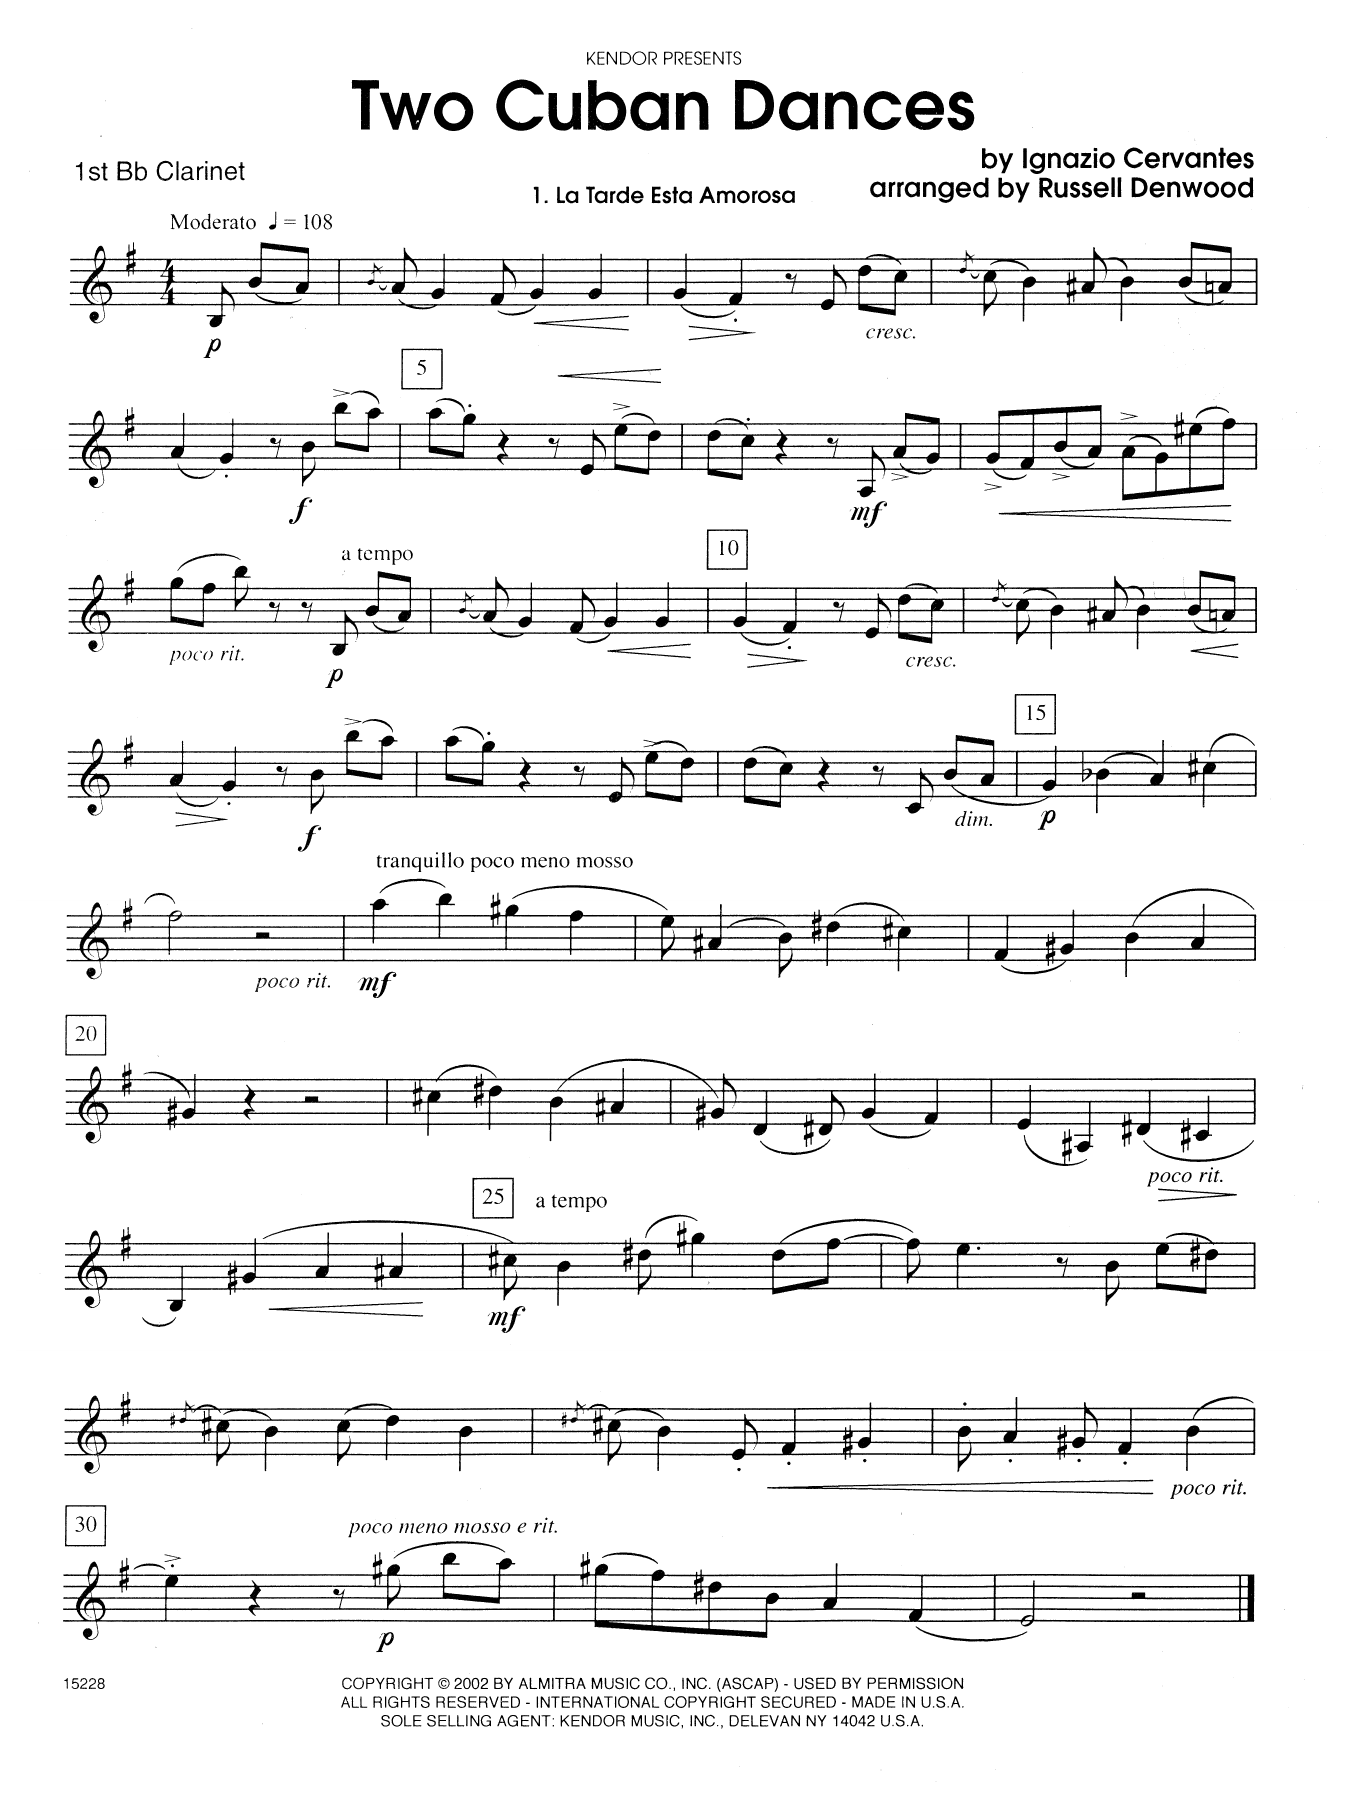 Russell Denwood Two Cuban Dances - 1st Bb Clarinet sheet music notes and chords. Download Printable PDF.